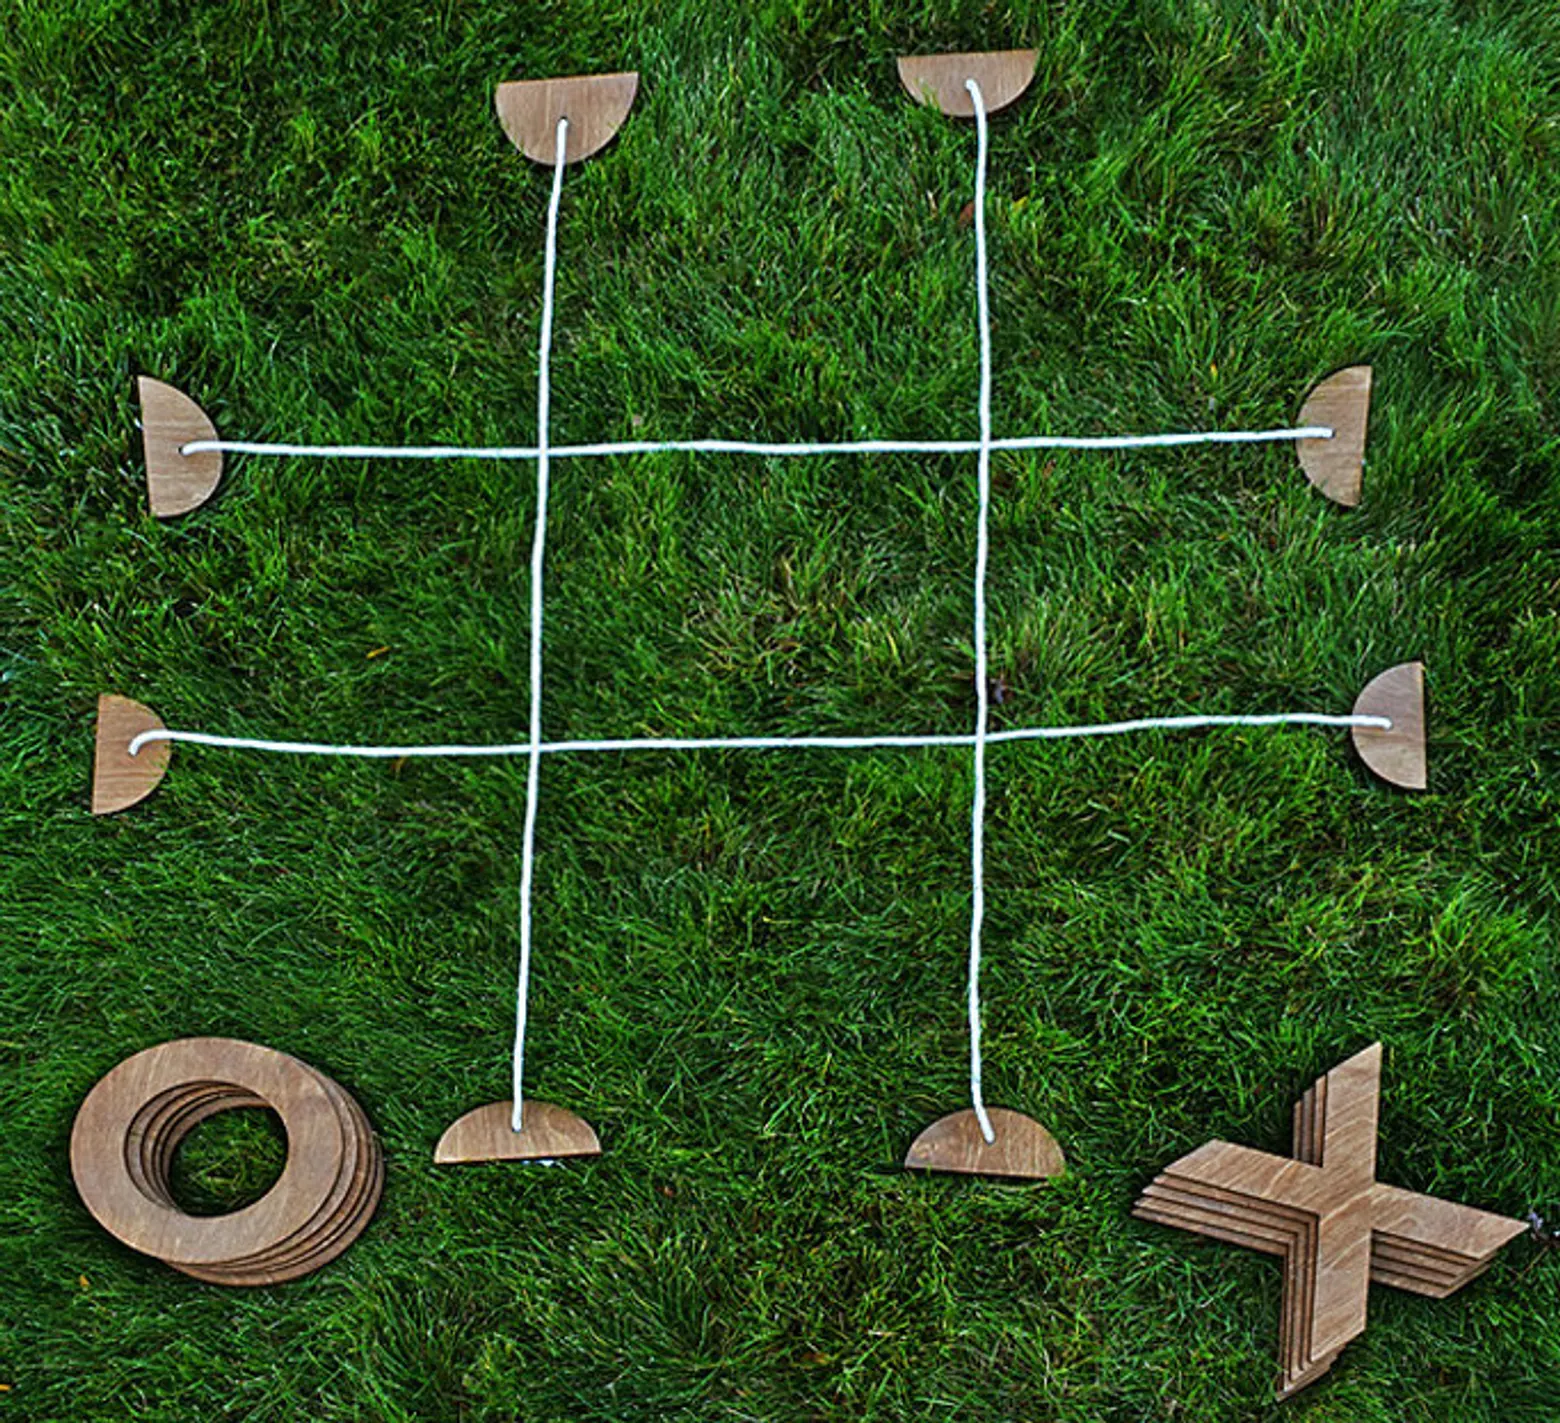 Giant Tic-Tac-Toe Set Transforms Any Patio Into a Playground